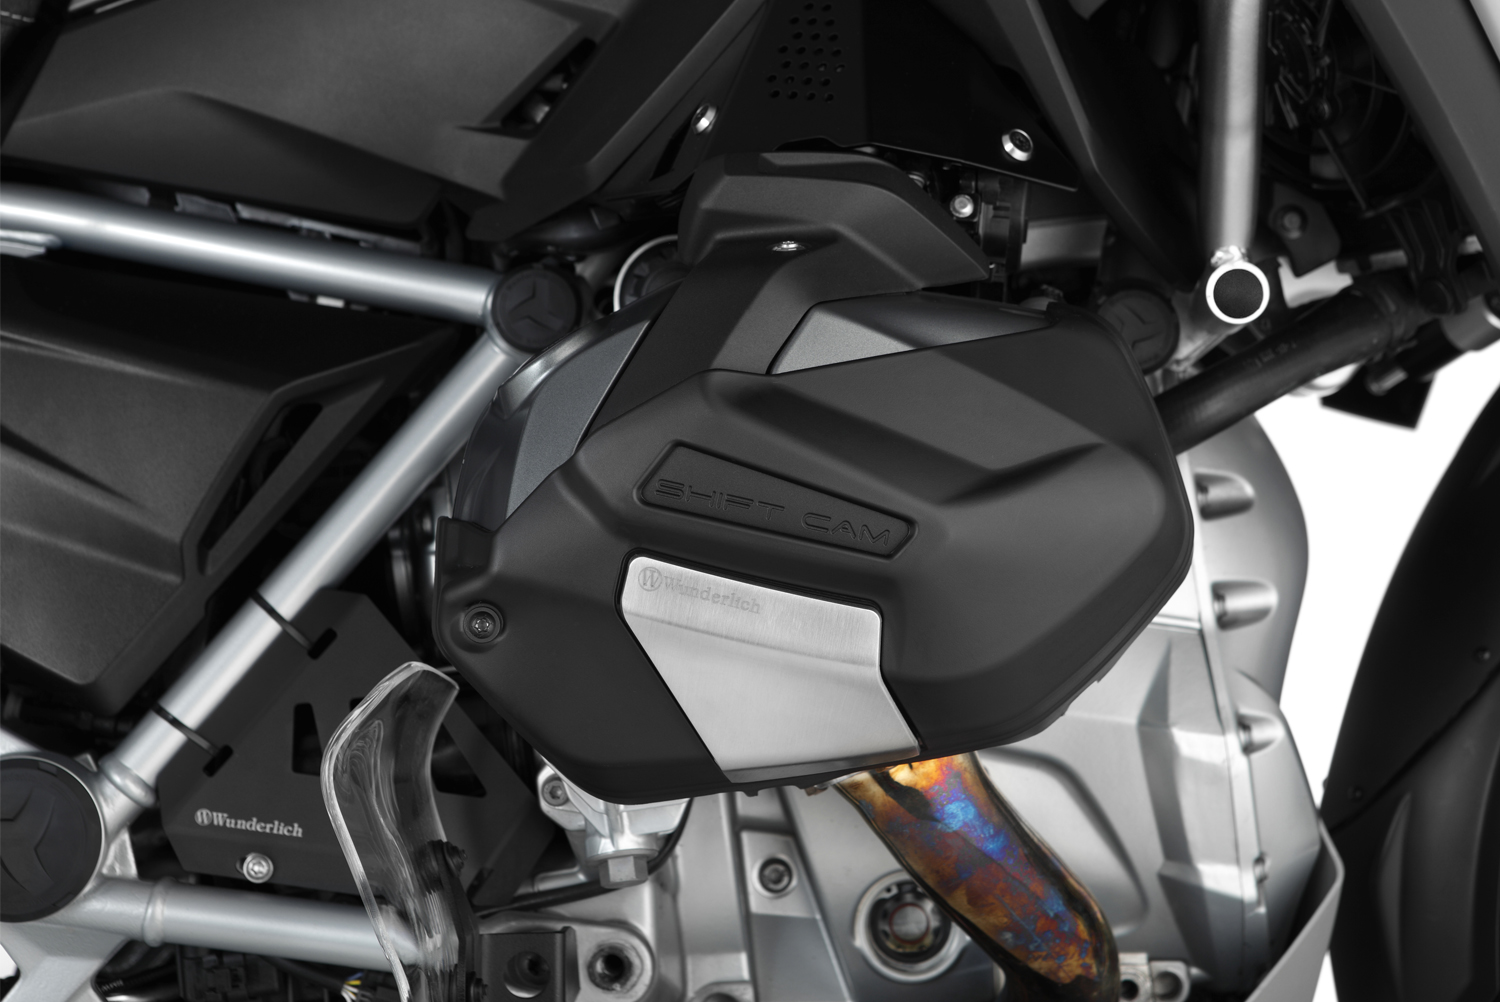 BMW R1250GS Accessories, Meet The King of Bling